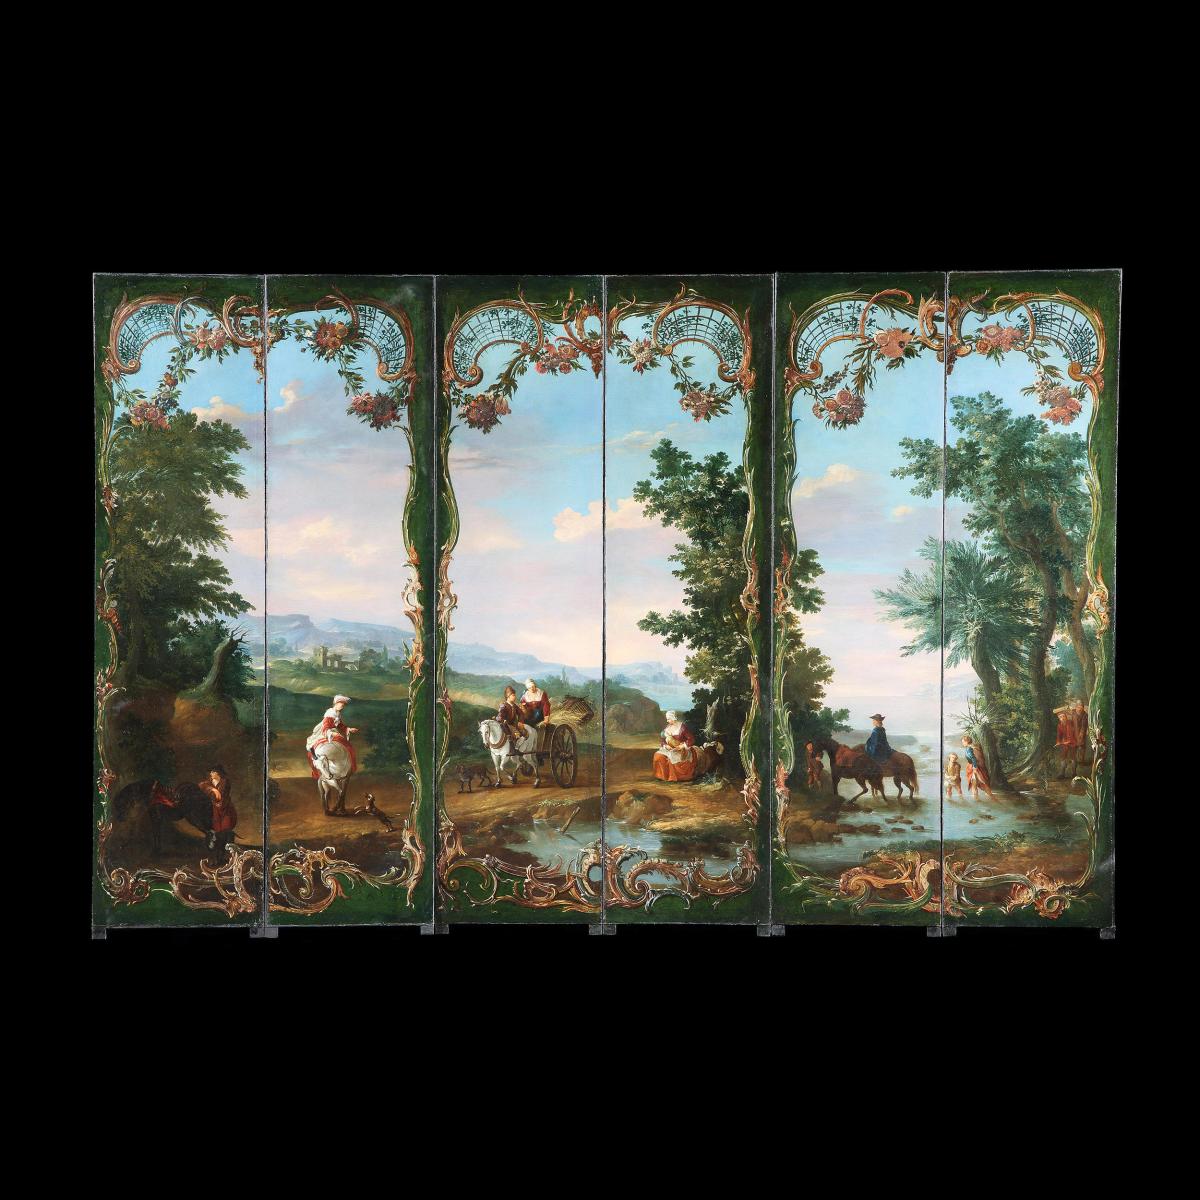 Six Panelled Screen of the Late Baroque Period